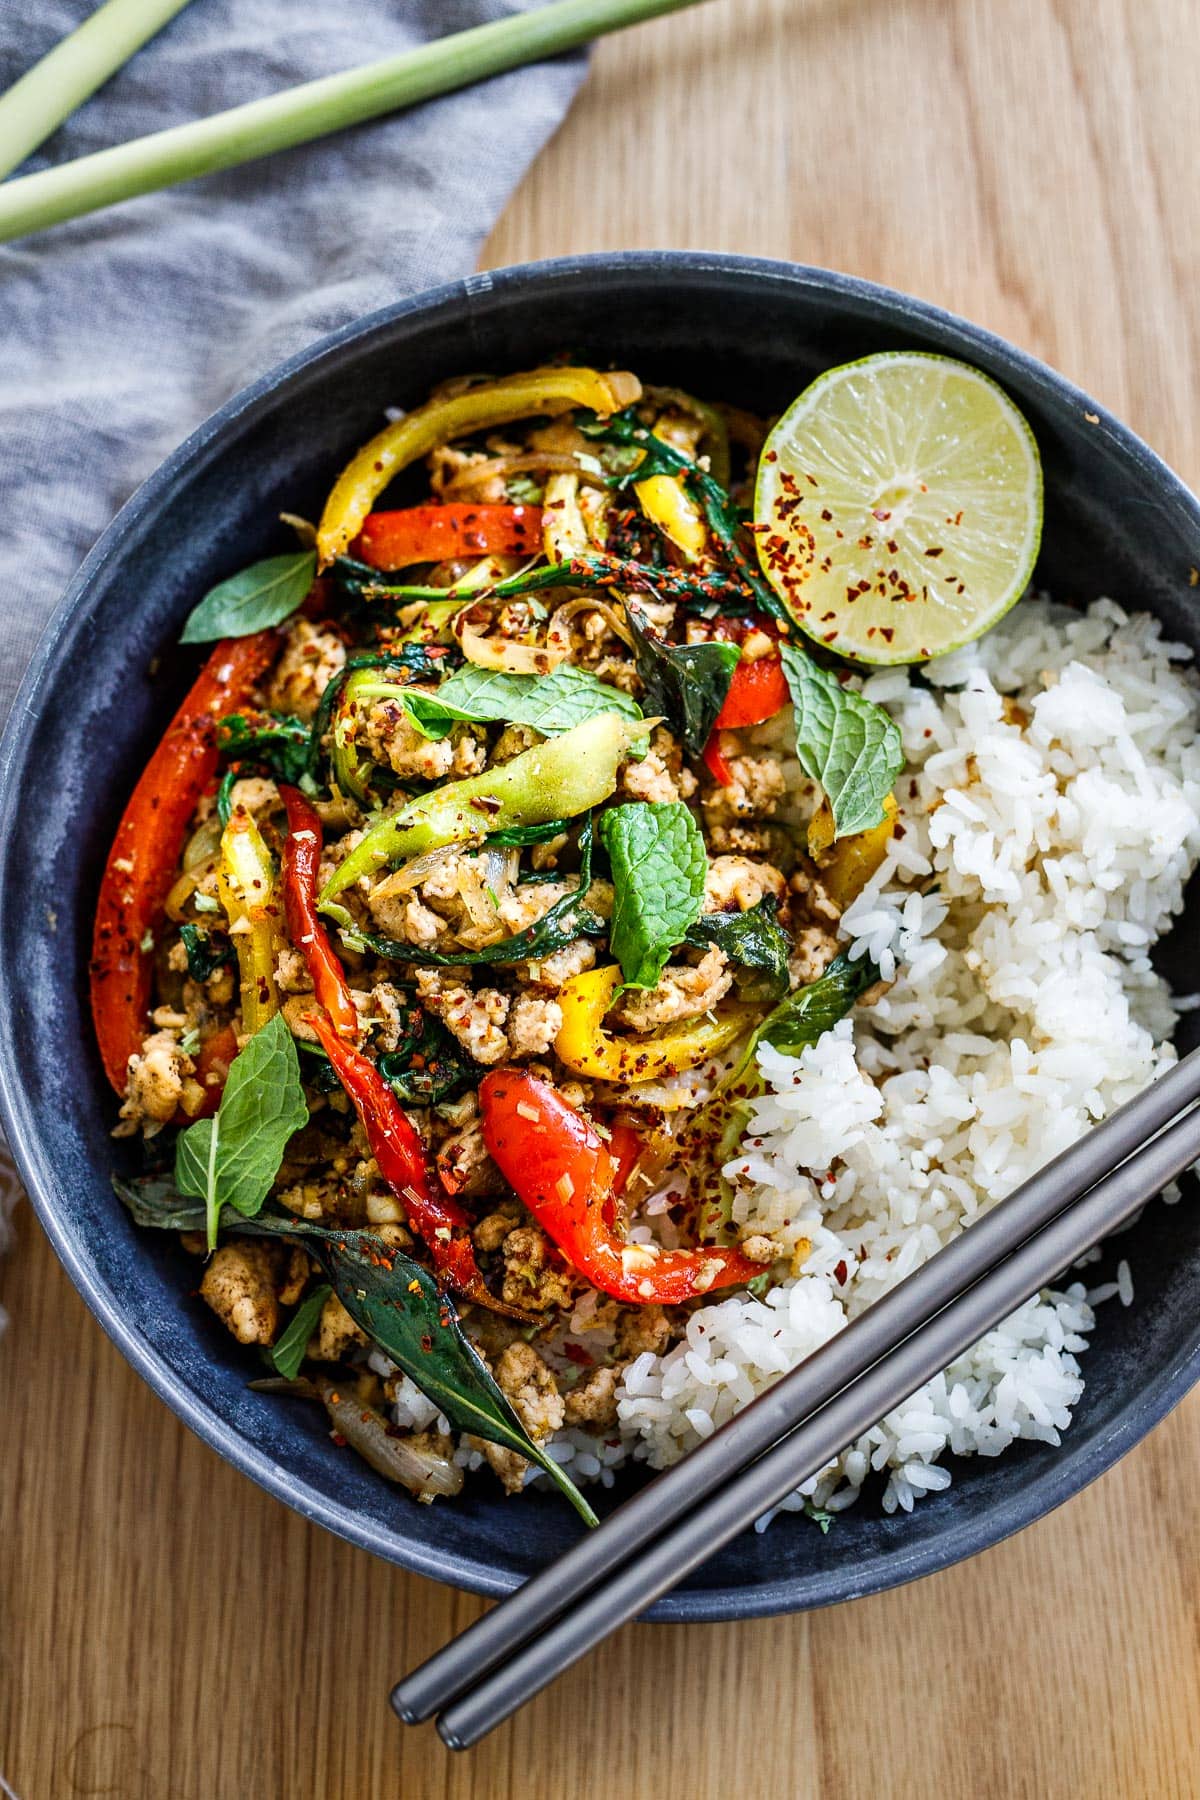 Here's a quick and easy recipe for Lemongrass Chicken that comes together in under 20 minutes, a flavorful Vietnamese- inspired dinner, perfect for busy weeknights.